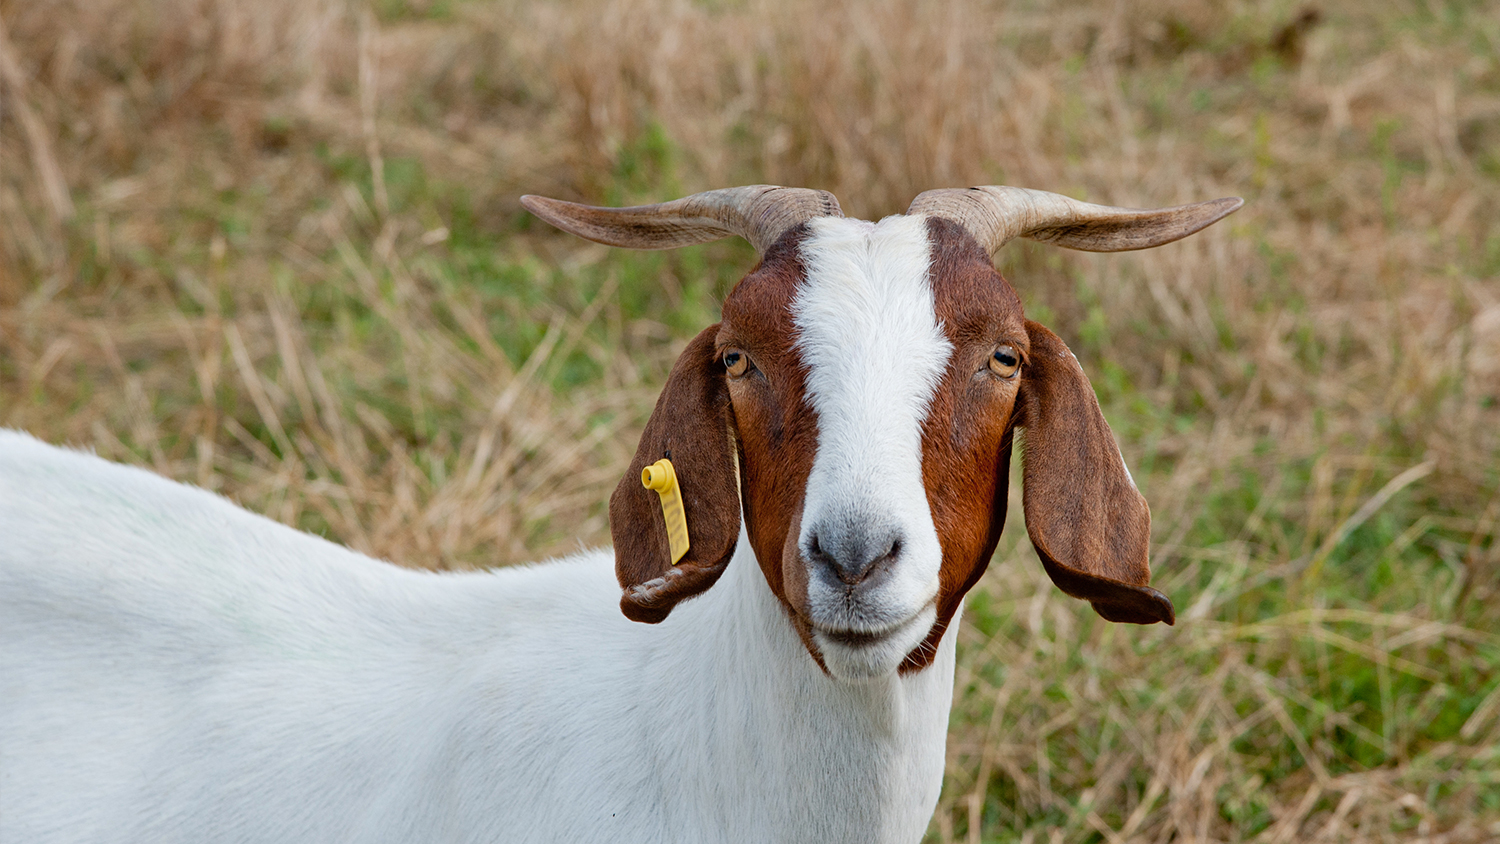 Medium sized brown and white goat with horns